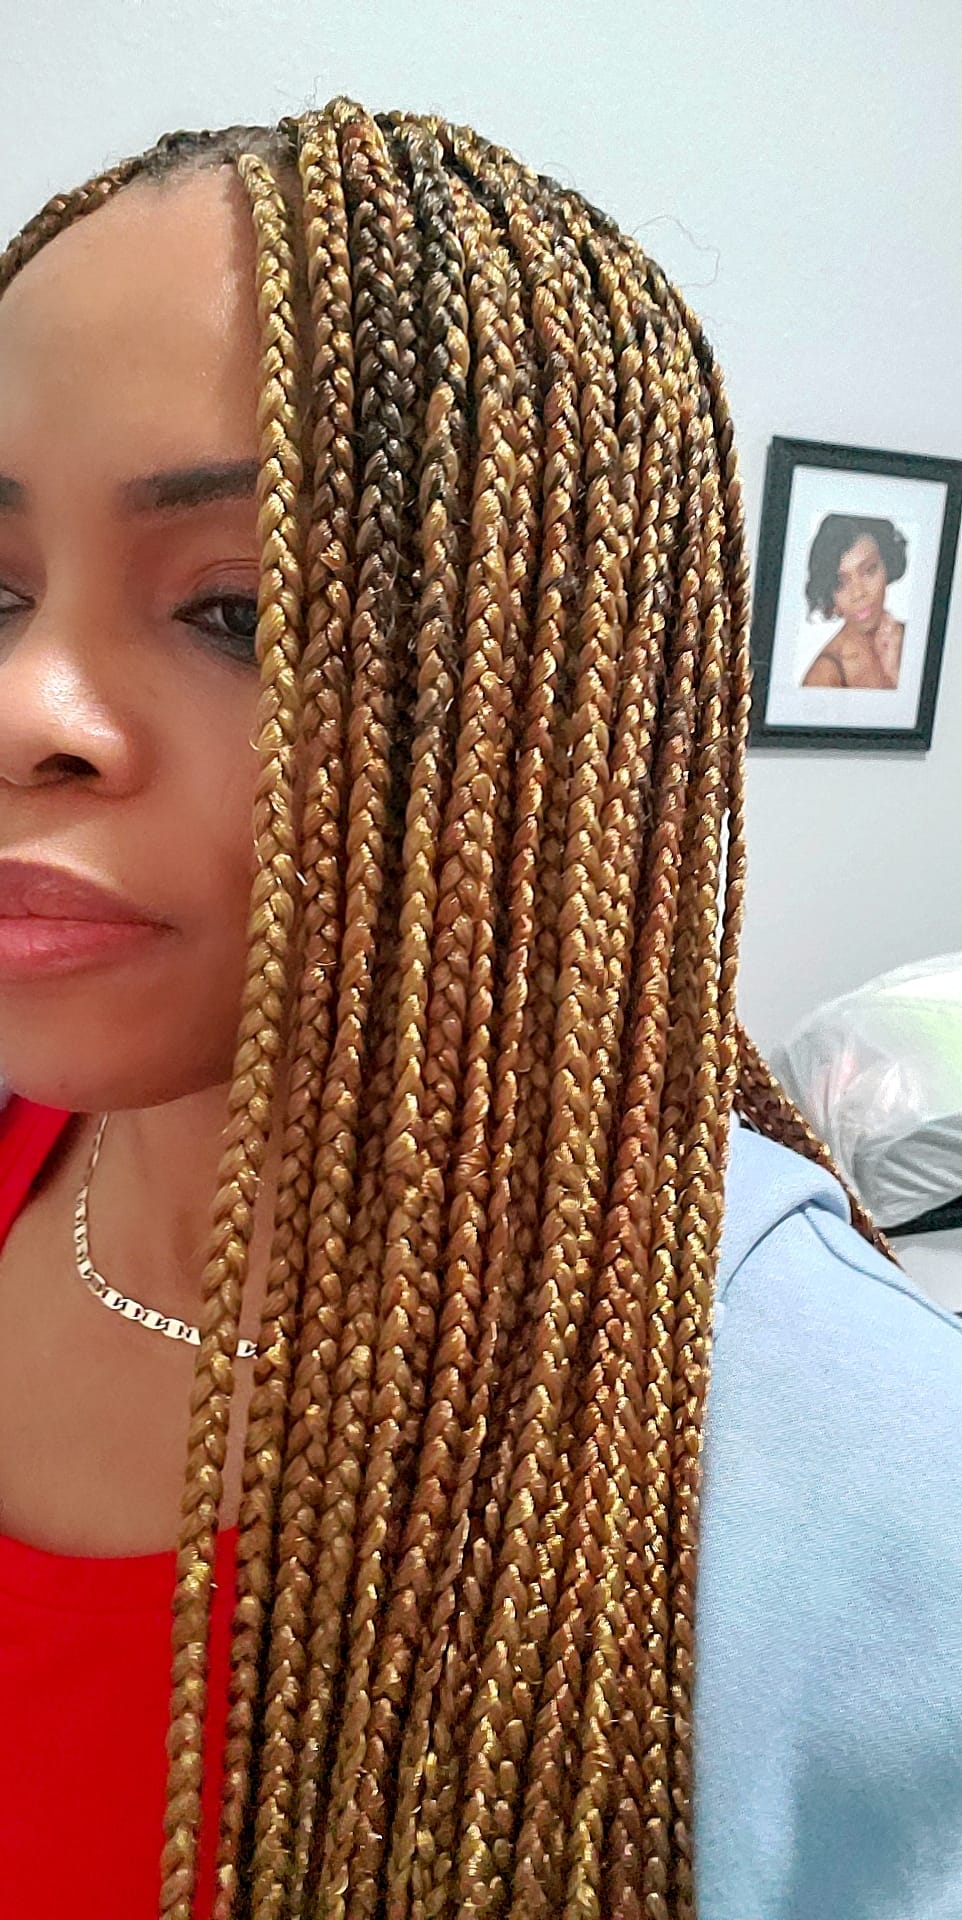 A woman with golden braids looking at the camera